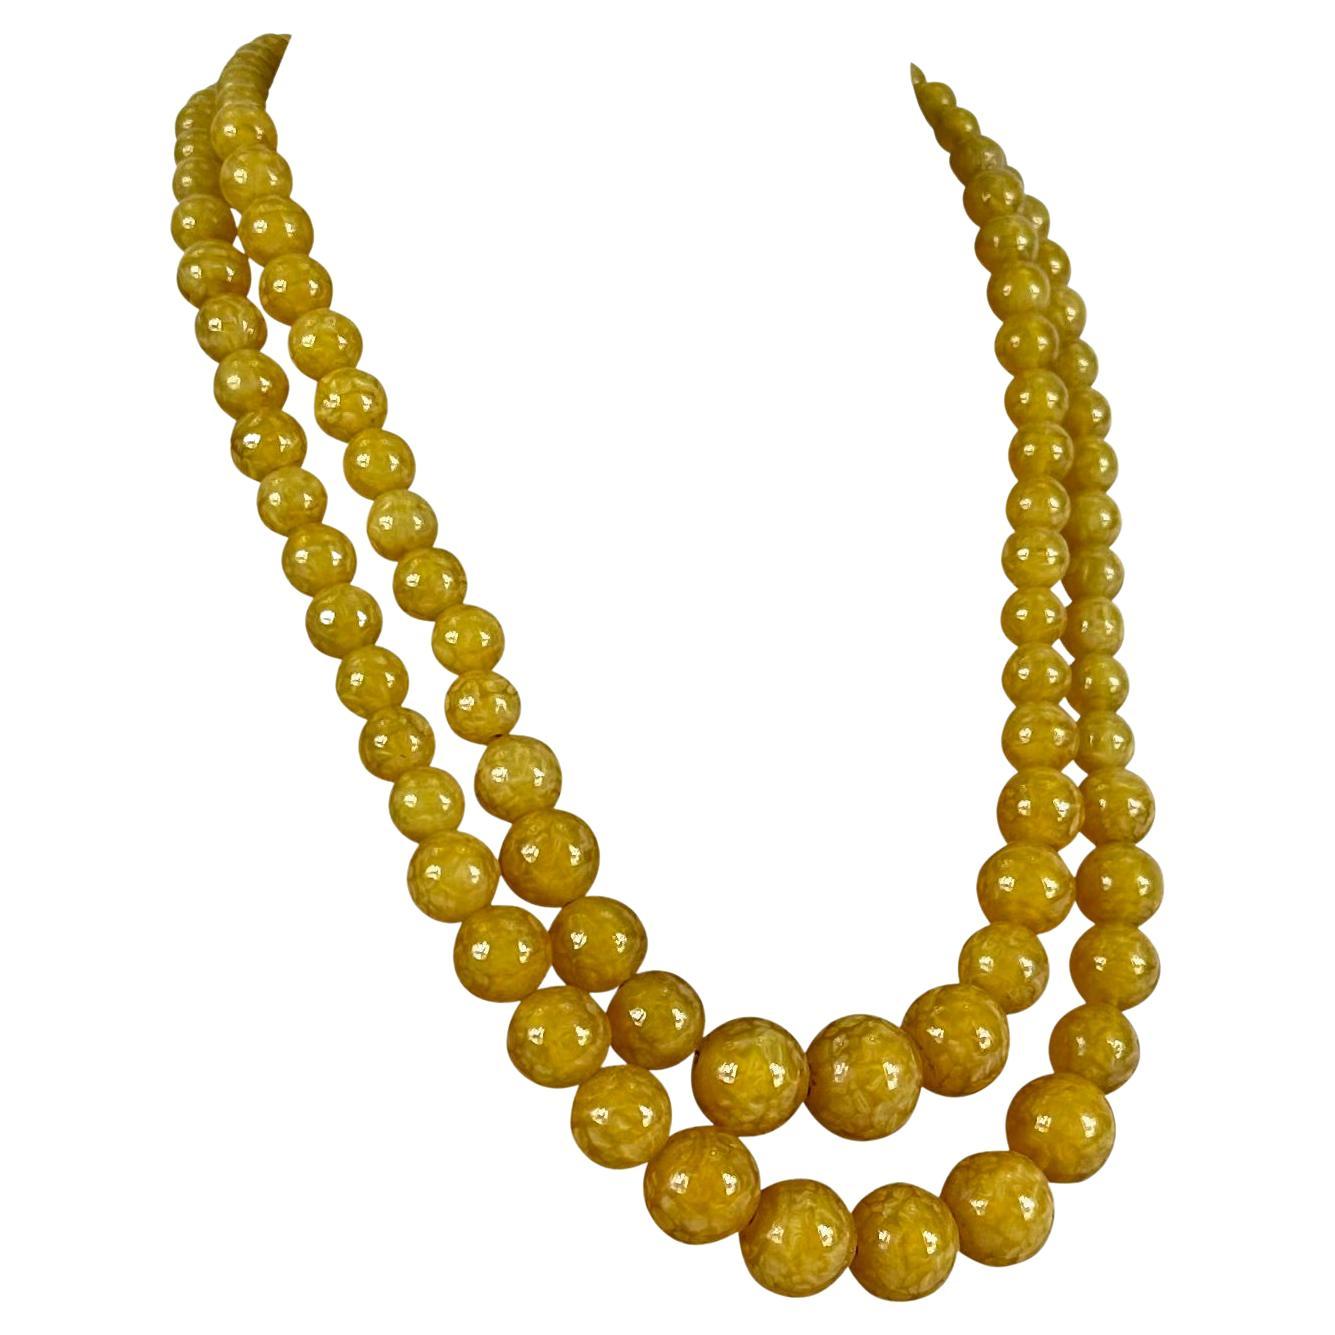 Presenting a fabulous honey colored Christian Dior necklace. Elevate your style with the timeless beauty of this 1962 Christian Dior honey graduated bead resin double necklace. This exquisite piece embodies the essence of Christian Dior's legacy.